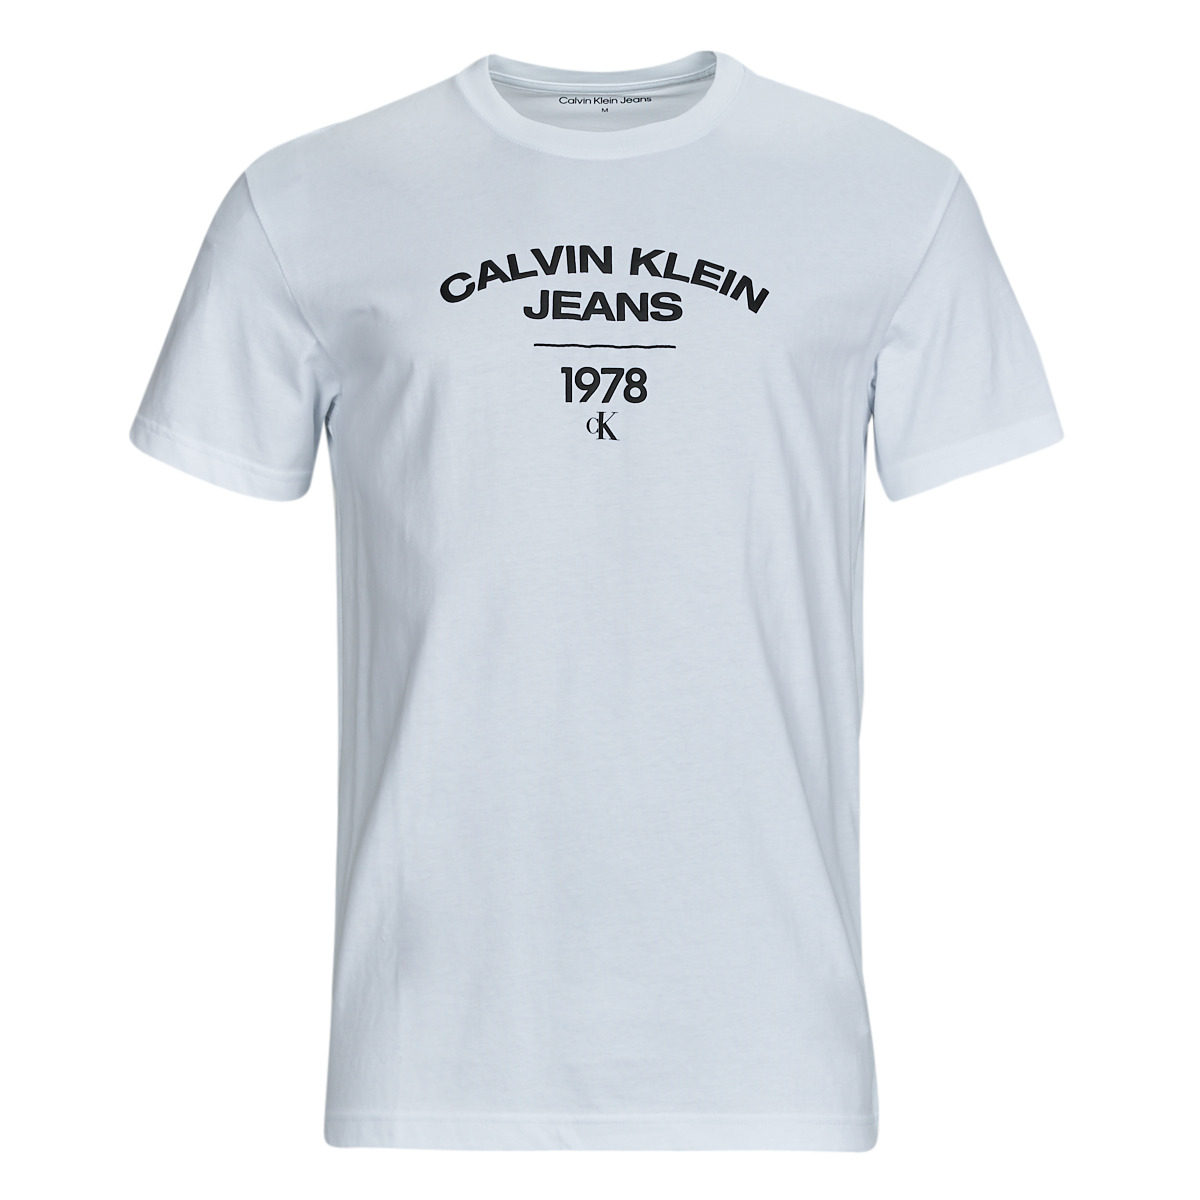 Calvin Klein Jeans VARSITY CURVE Clothing Spartoo ! | - White short-sleeved - Free Men delivery NET t-shirts LOGO T-SHIRT